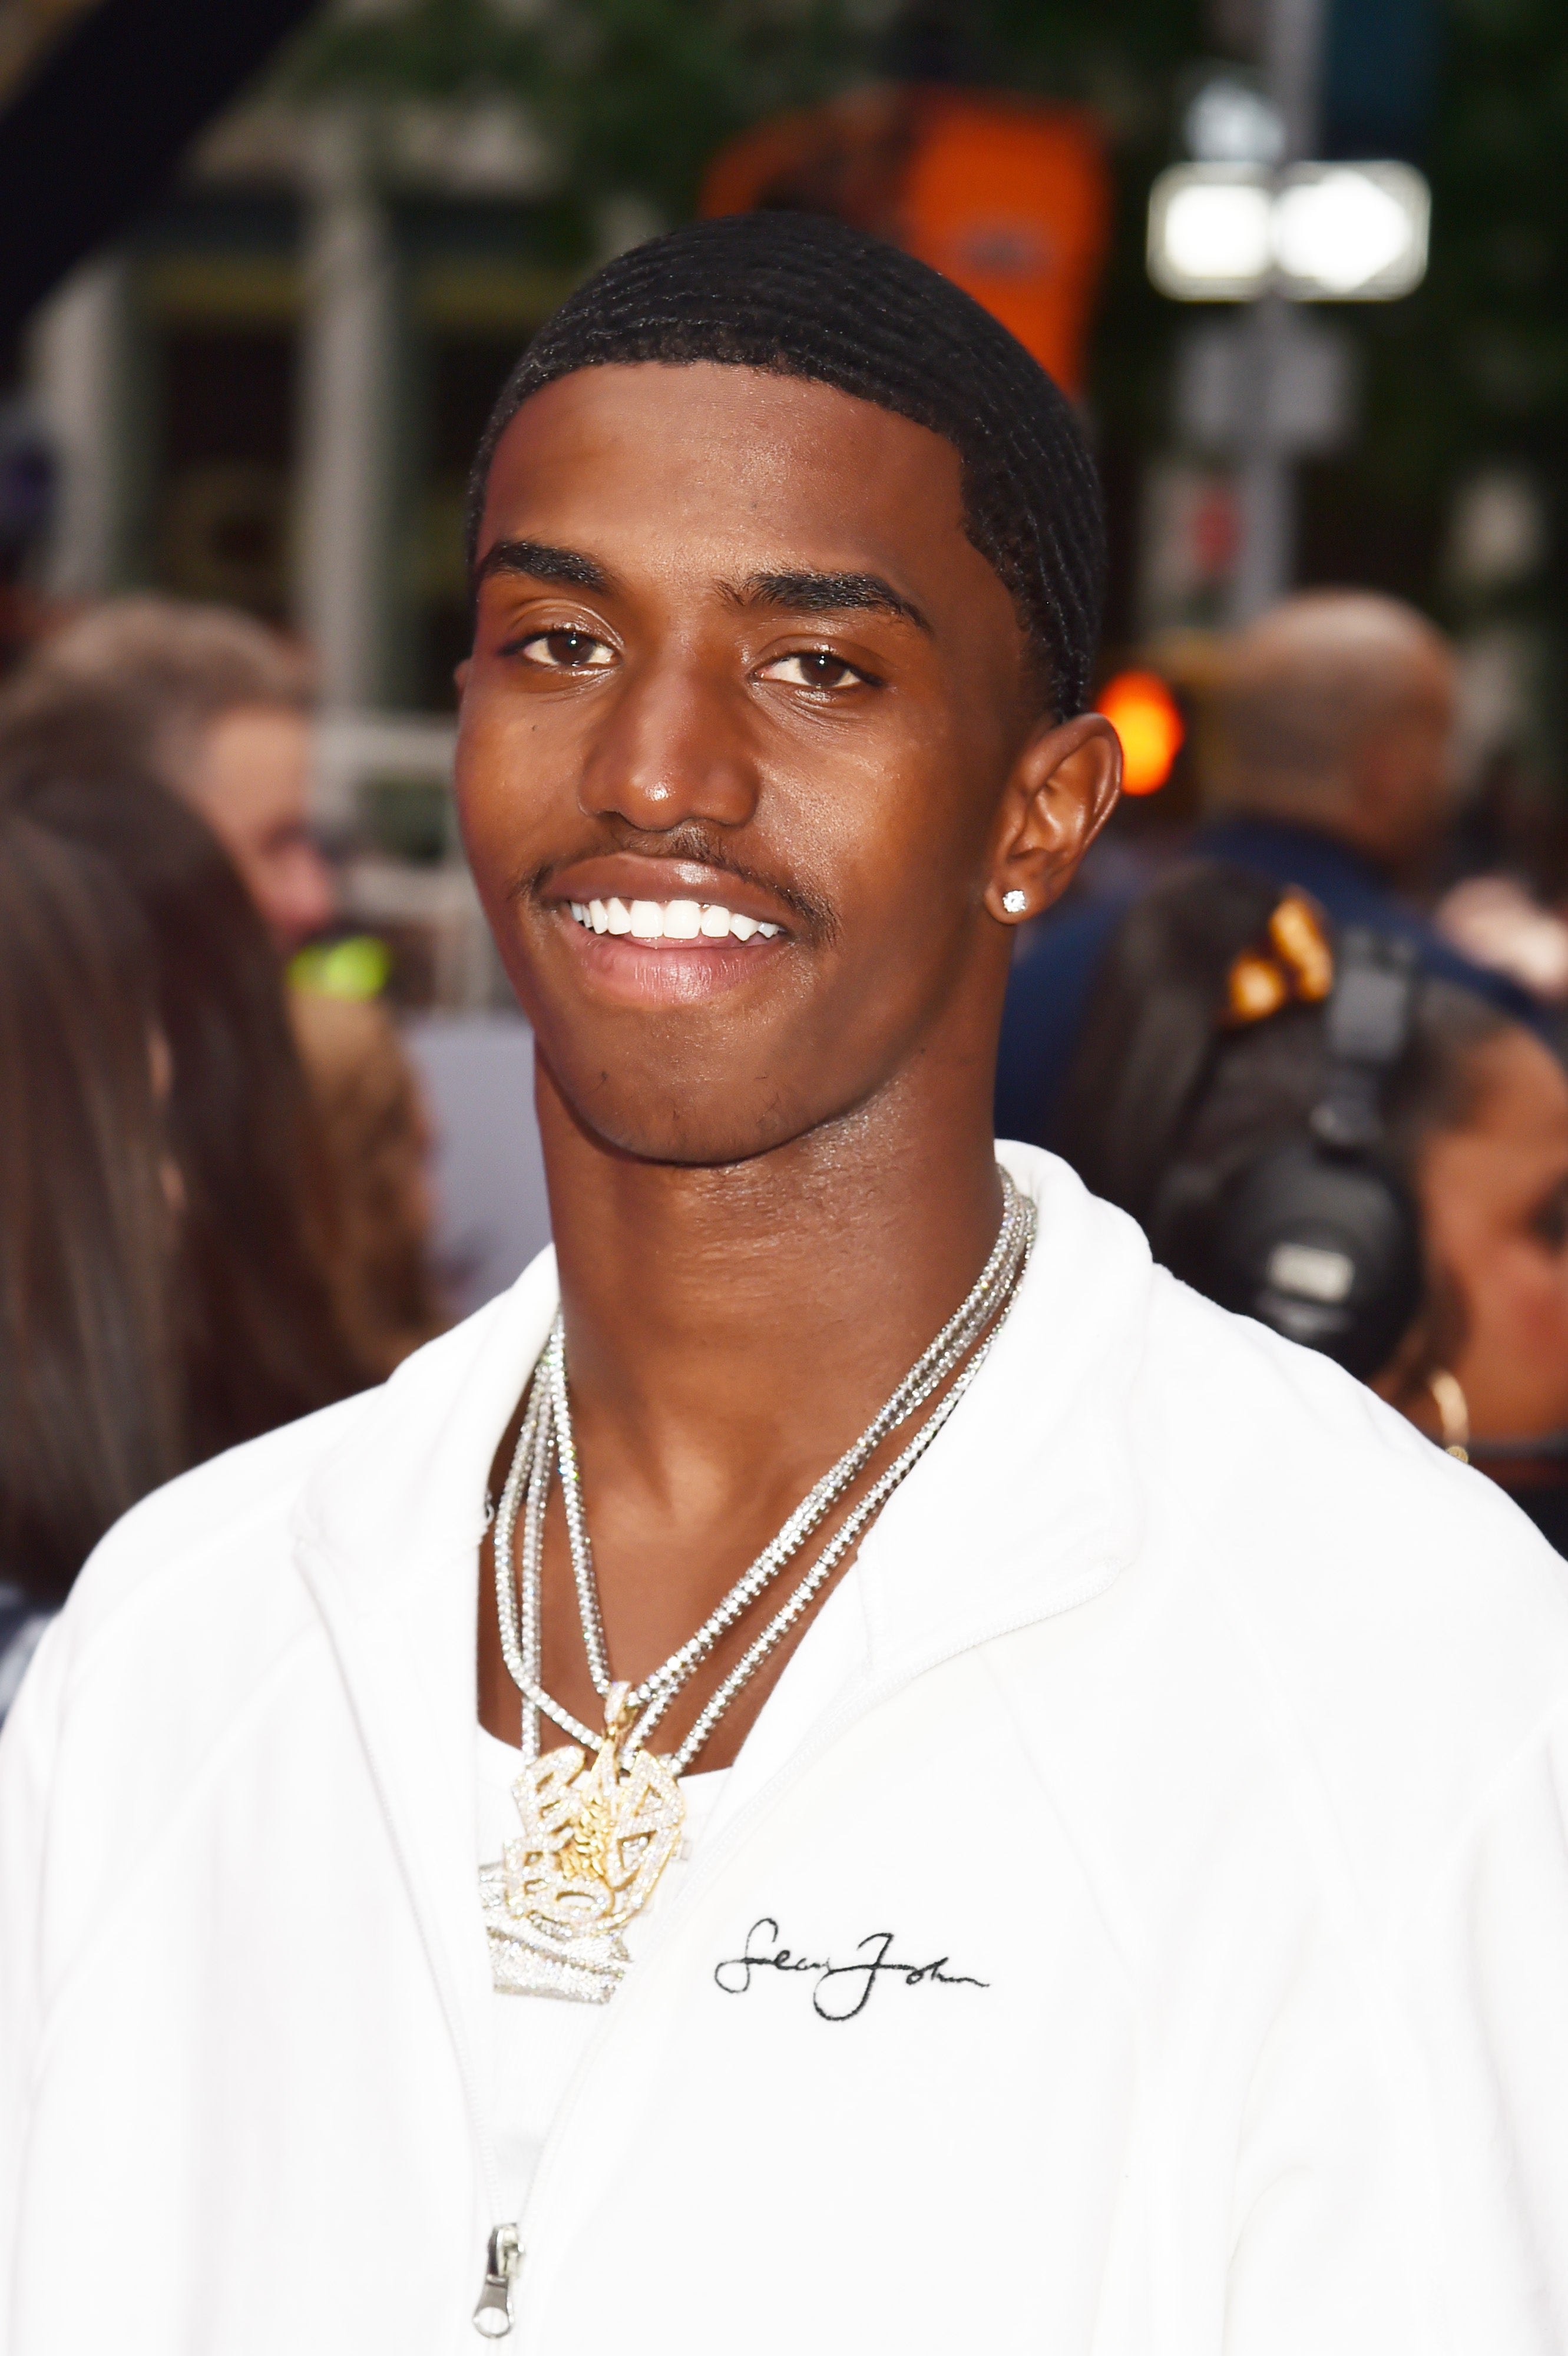 Christian Combs Opens Up About Losing His Mother Kim Porter: 'My Whole World Stopped'